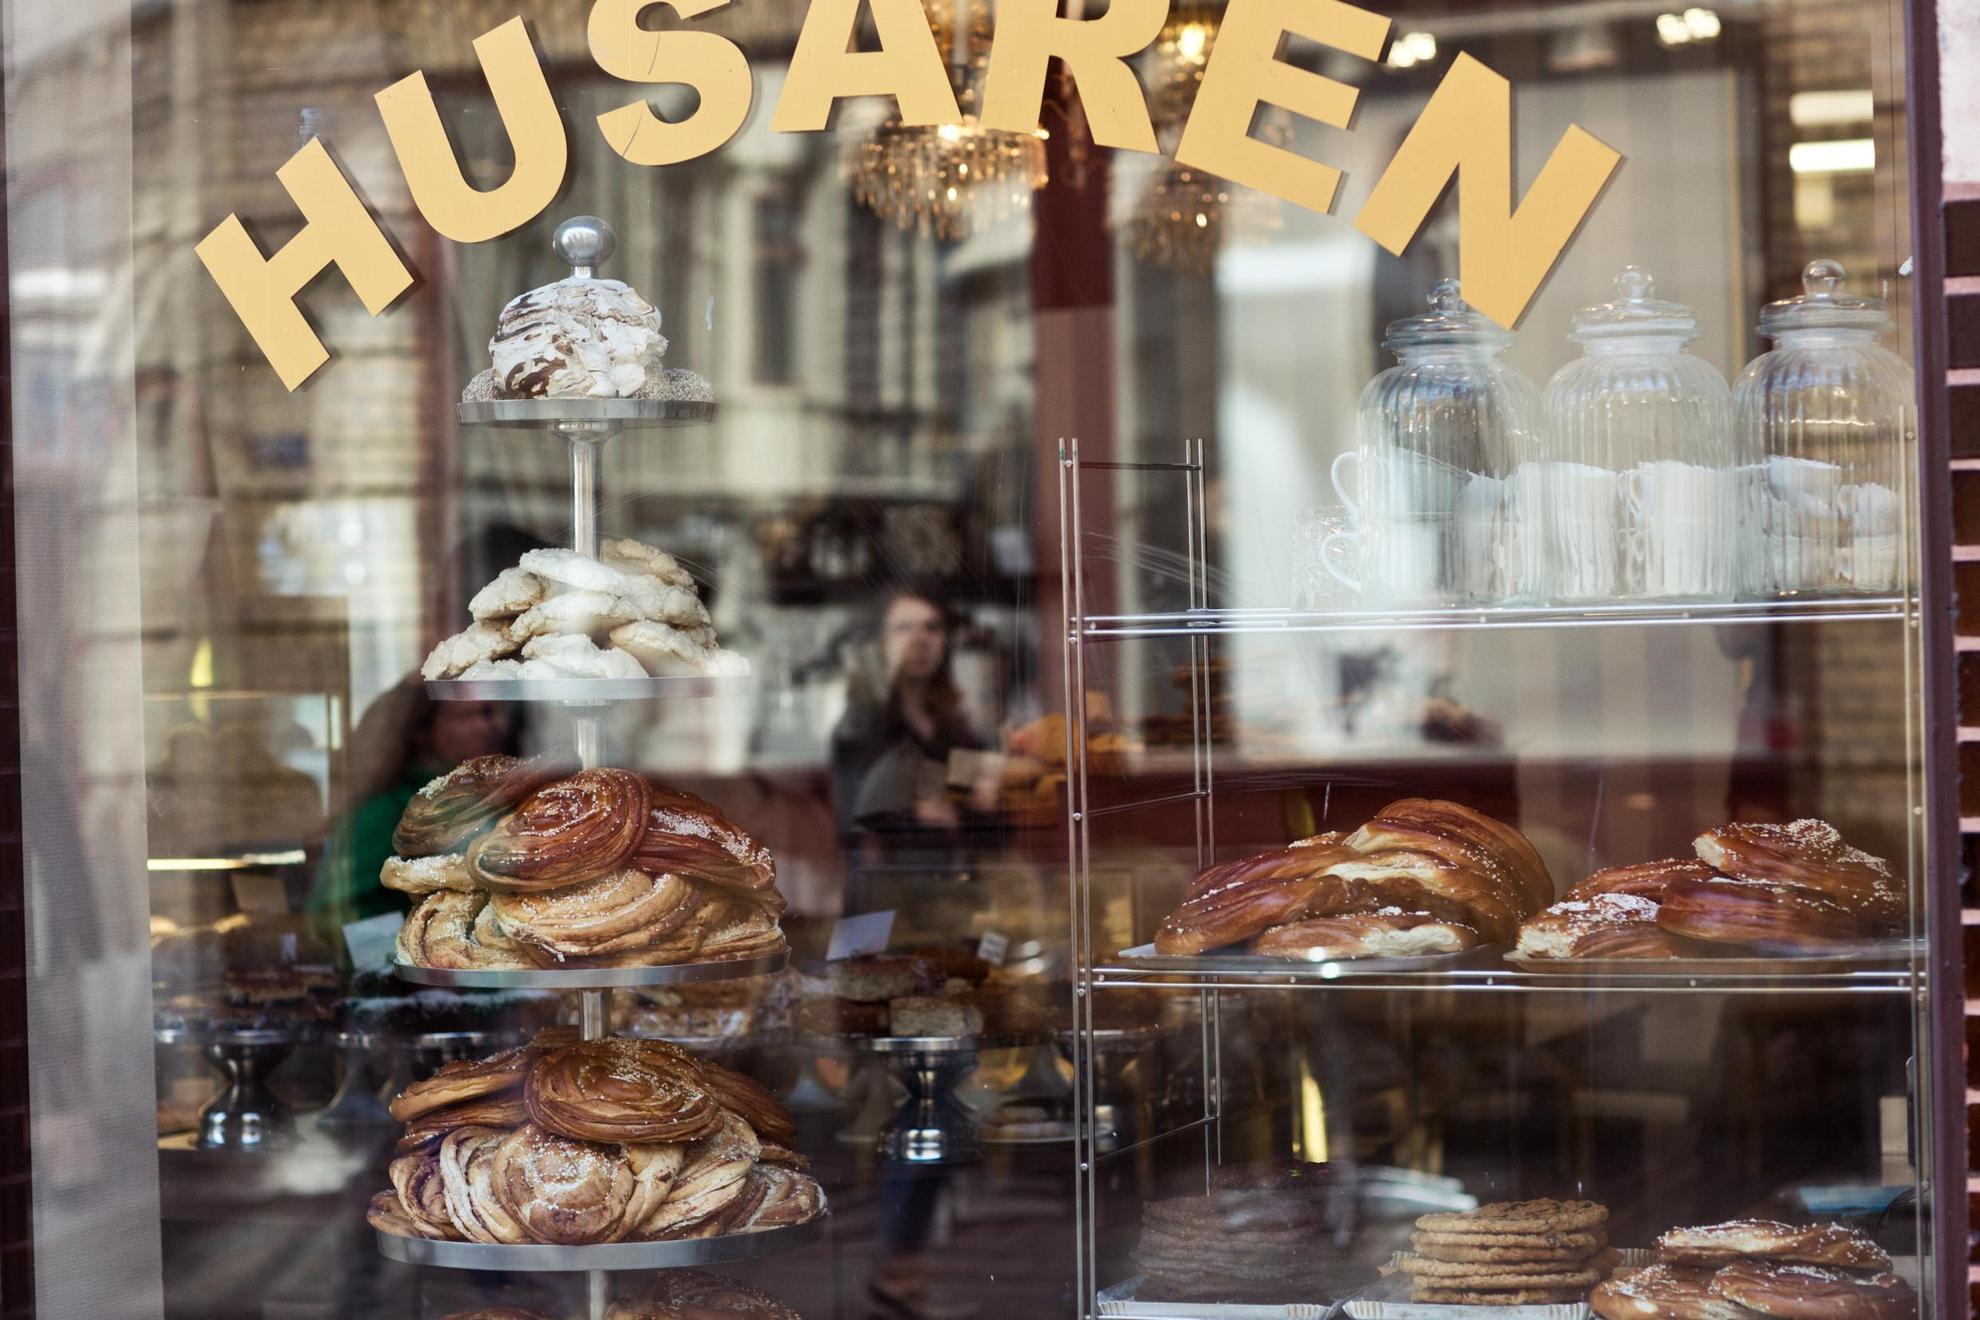 Large Swedish cinnamon buns, cookies and meringues seen through the display window of a bakery.